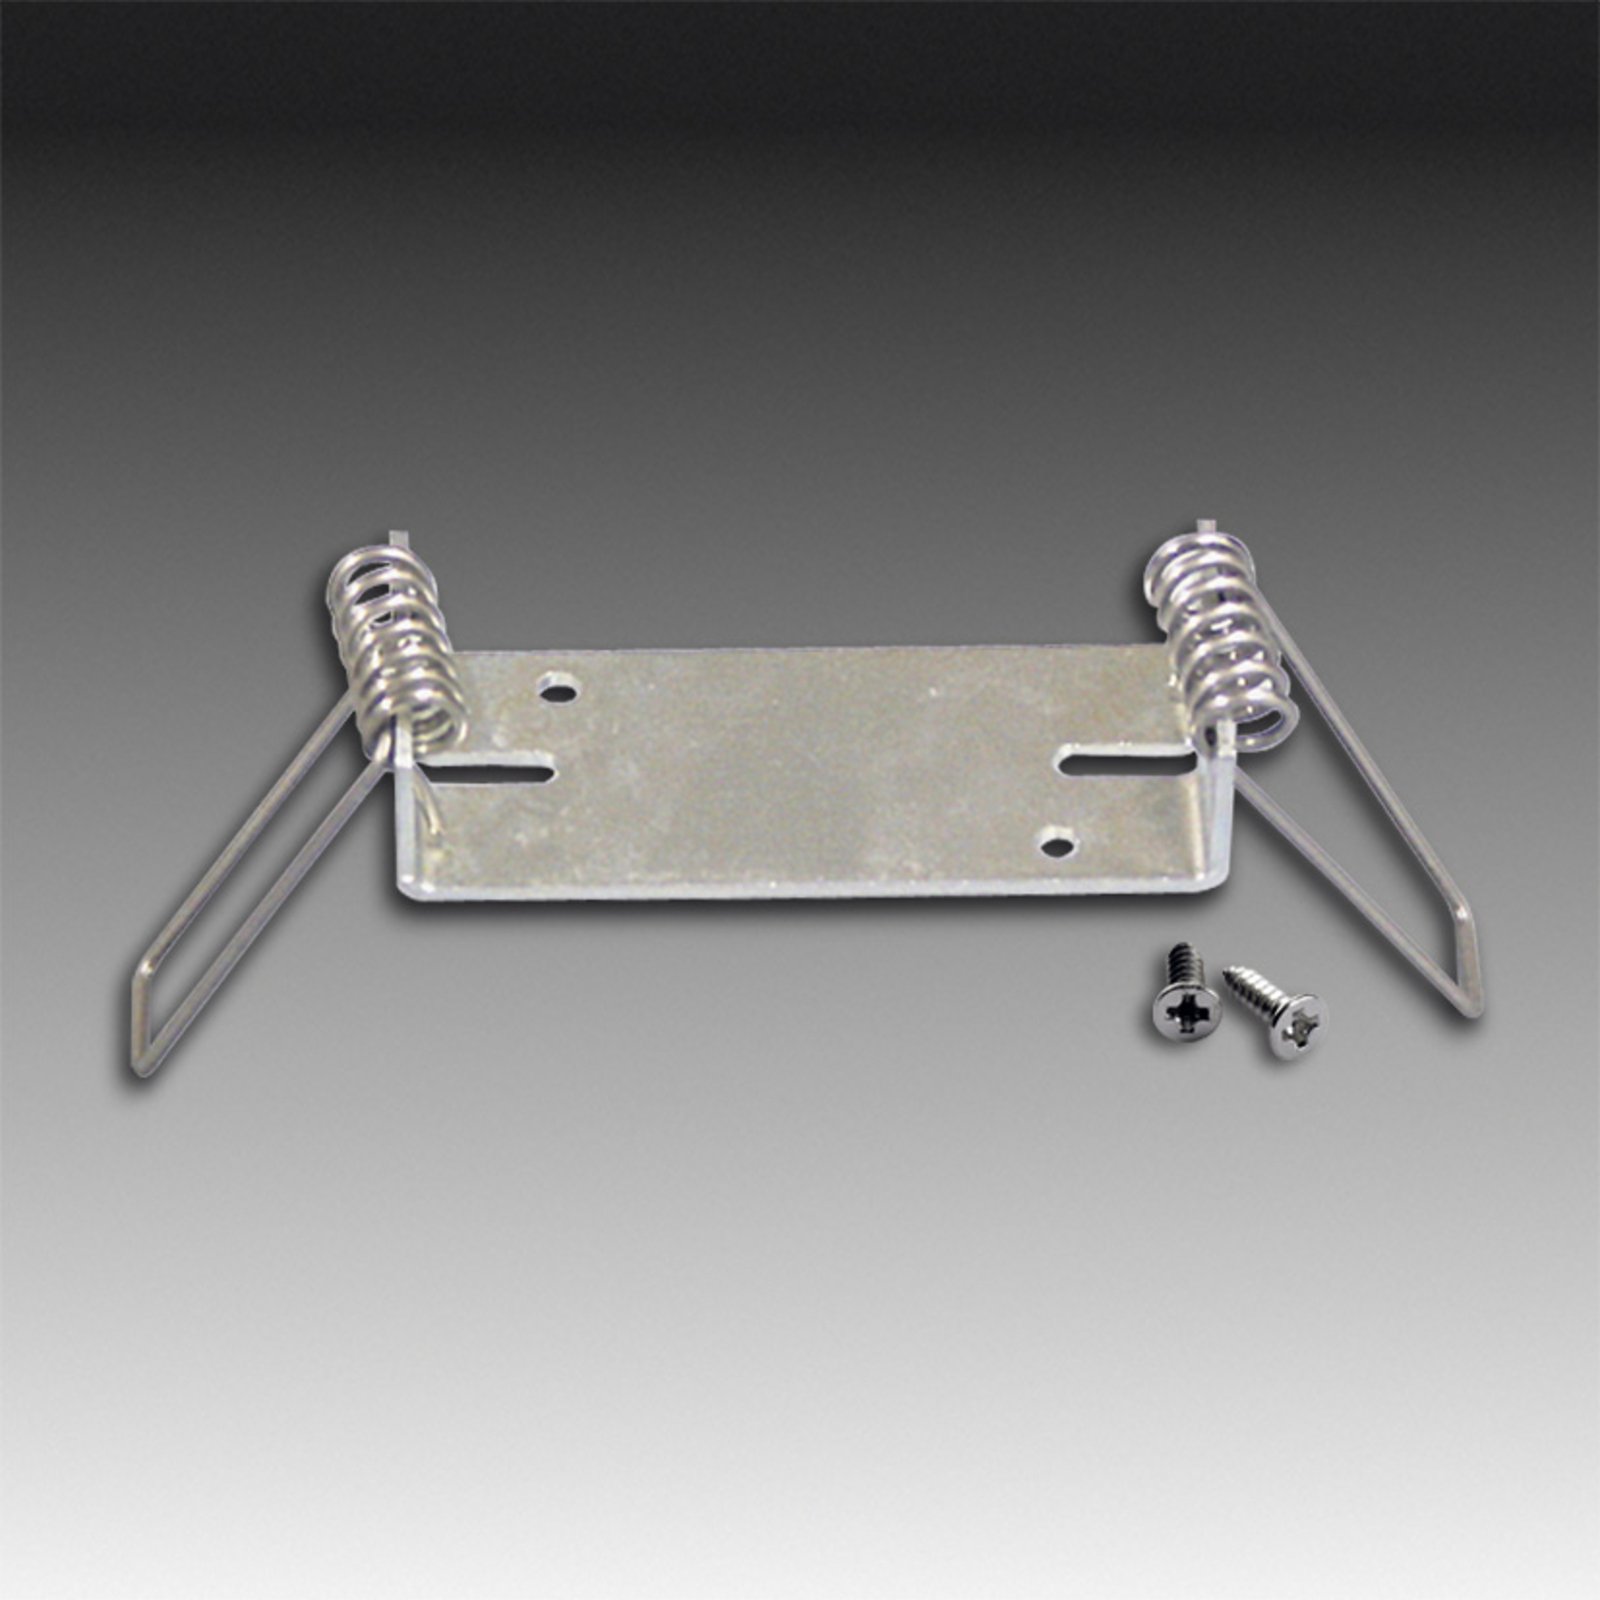 Mounting spring for ARF 68 and ARF 78 Q